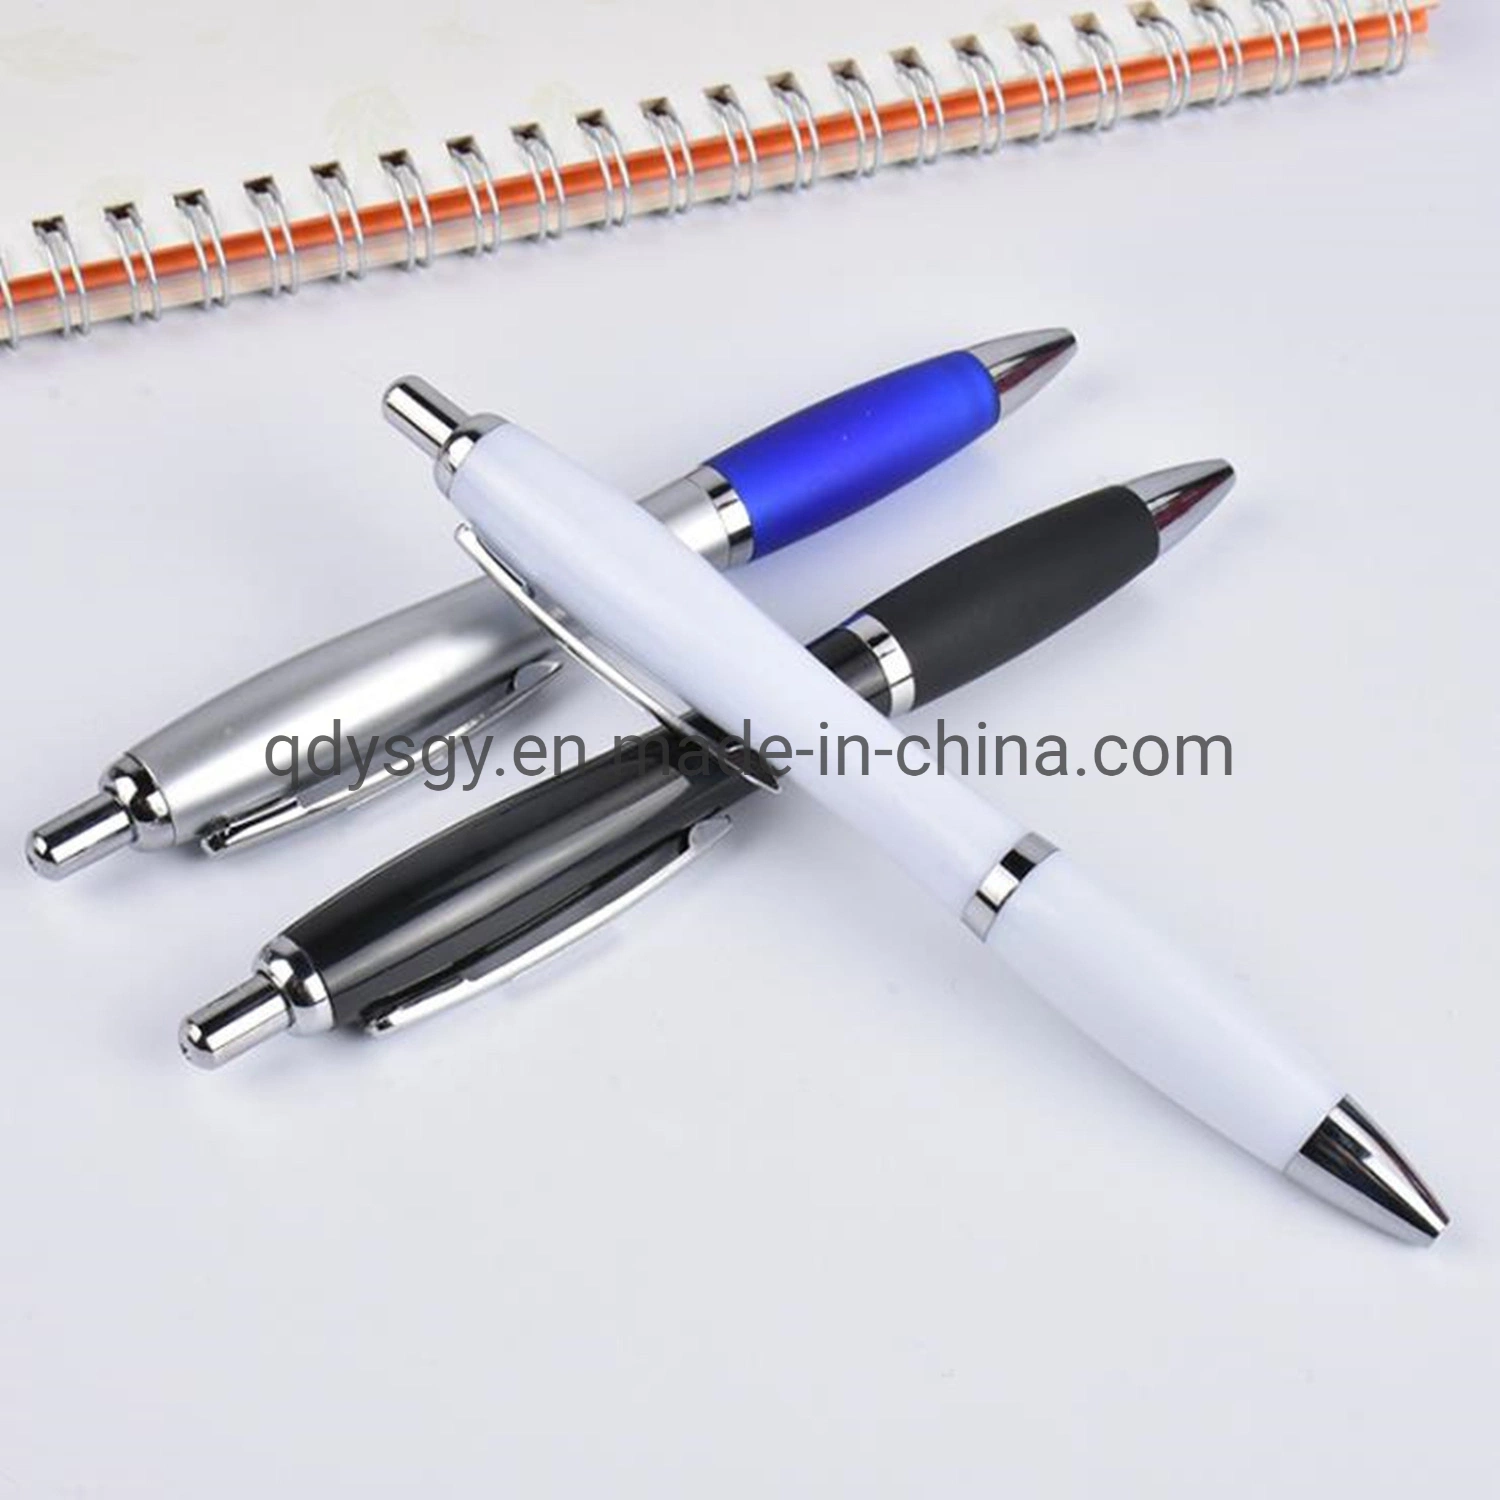 Promotional Stationery Office Supply Gourd Ball Pen with 1.0mm Diameter